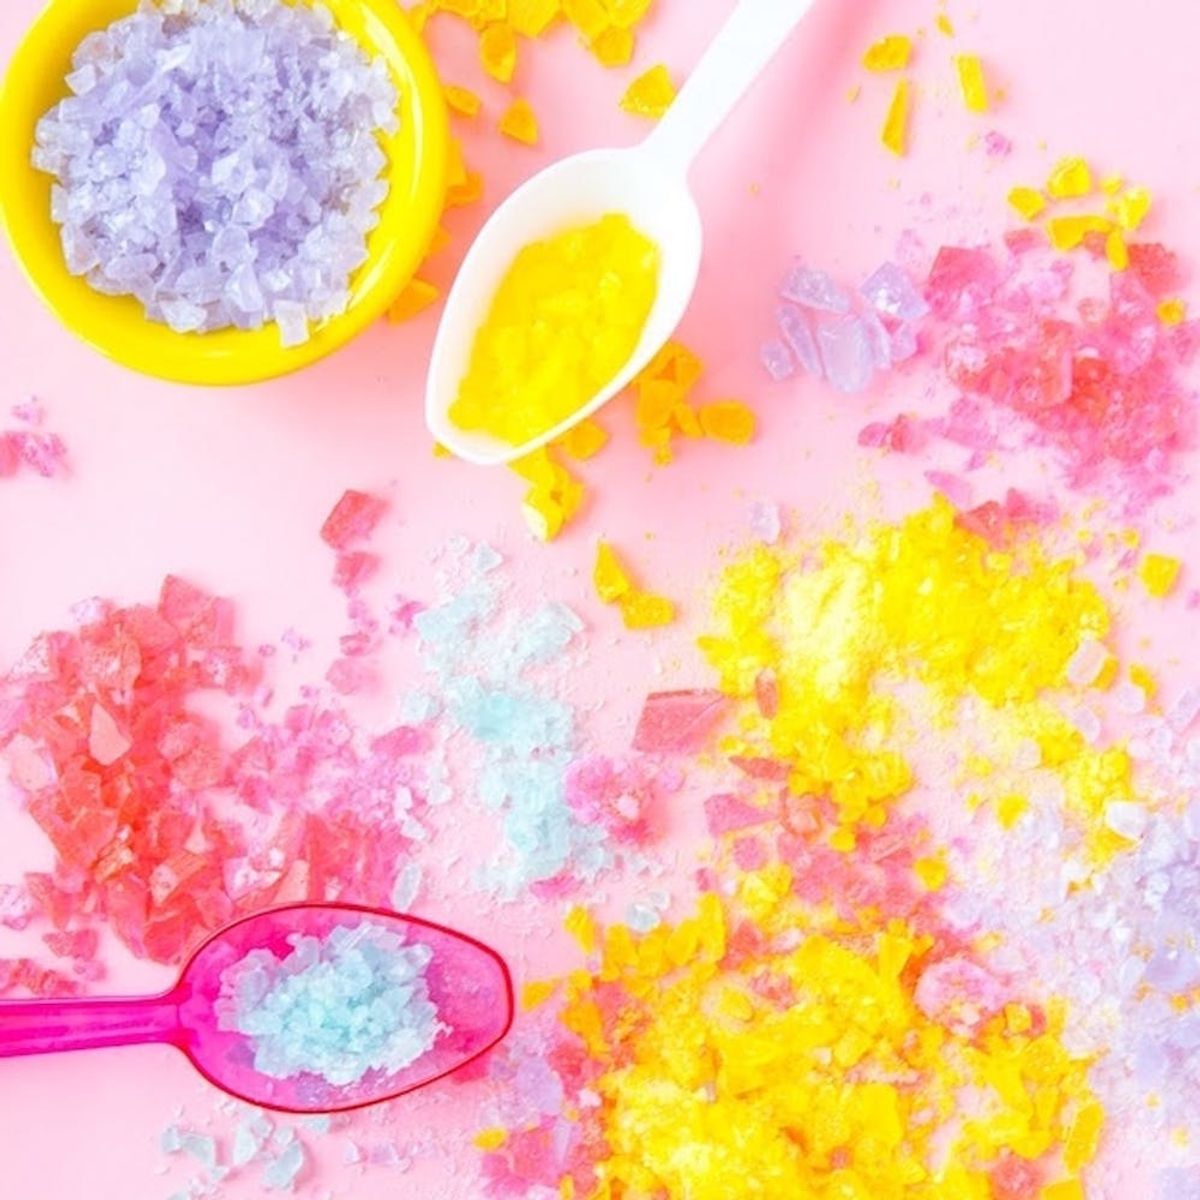 What to Make This Weekend: Candy Pop Rocks, Retro Beach Umbrella + More